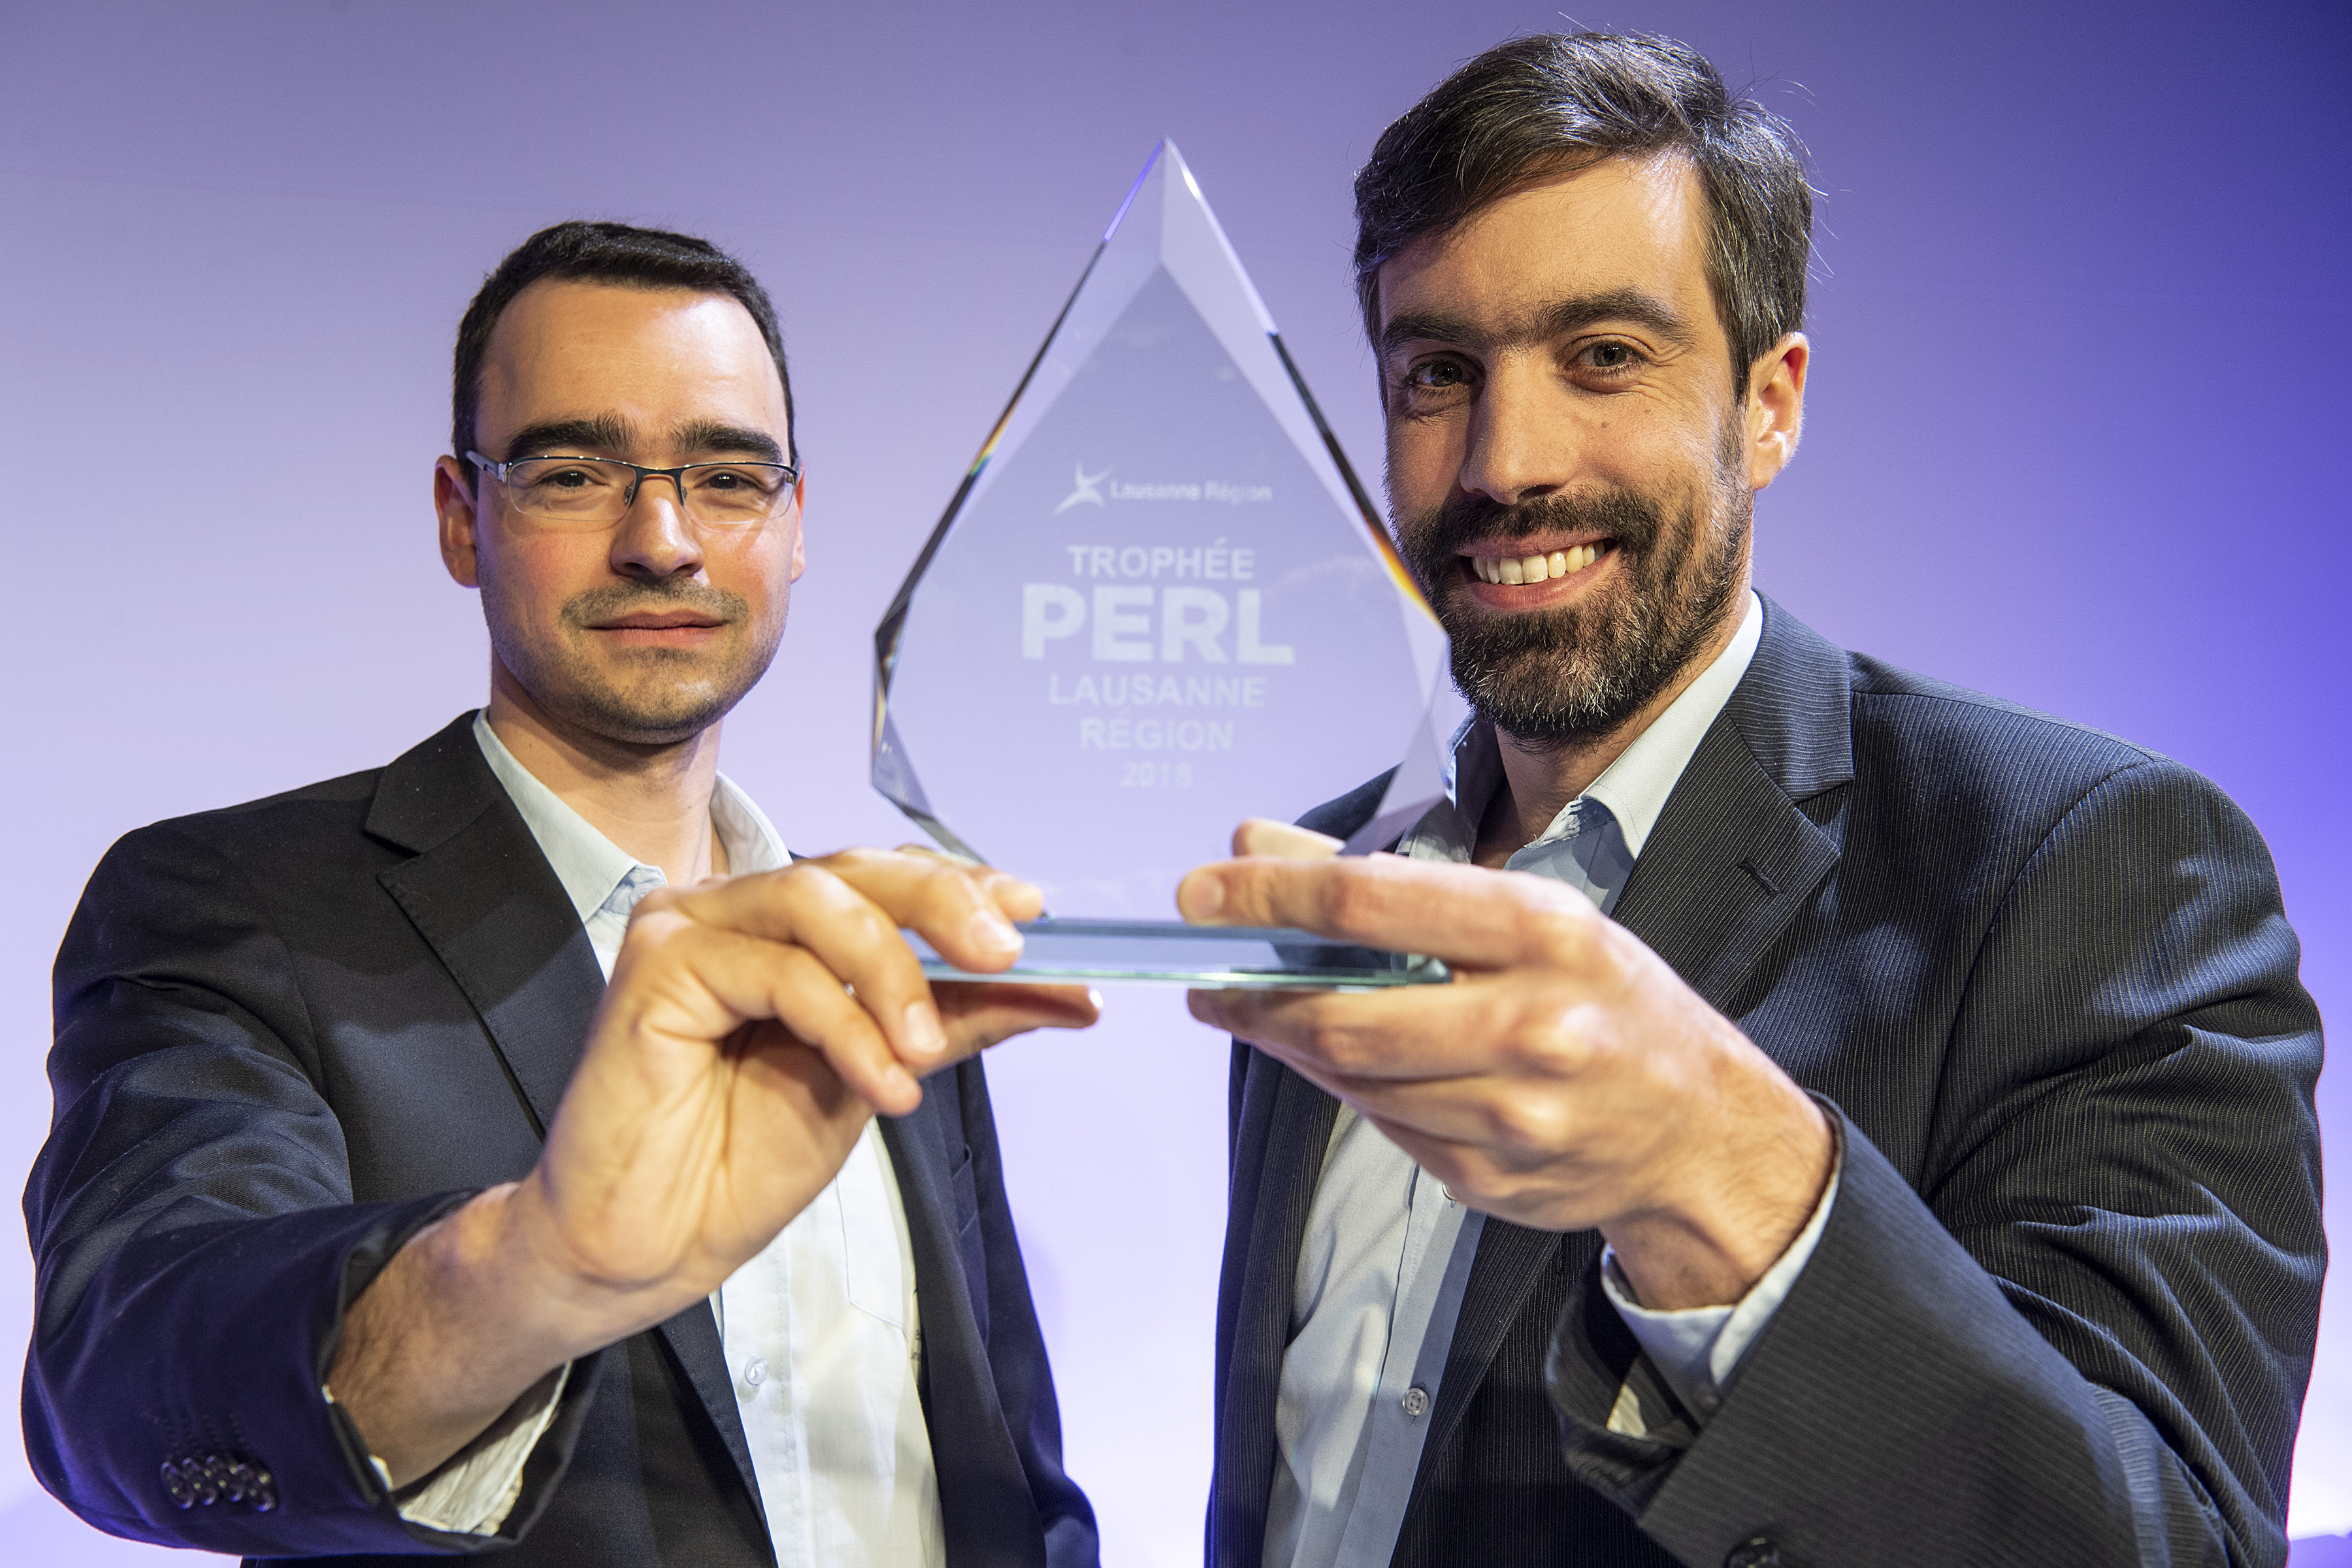 Prix PERL 2019: A vos candidatures !